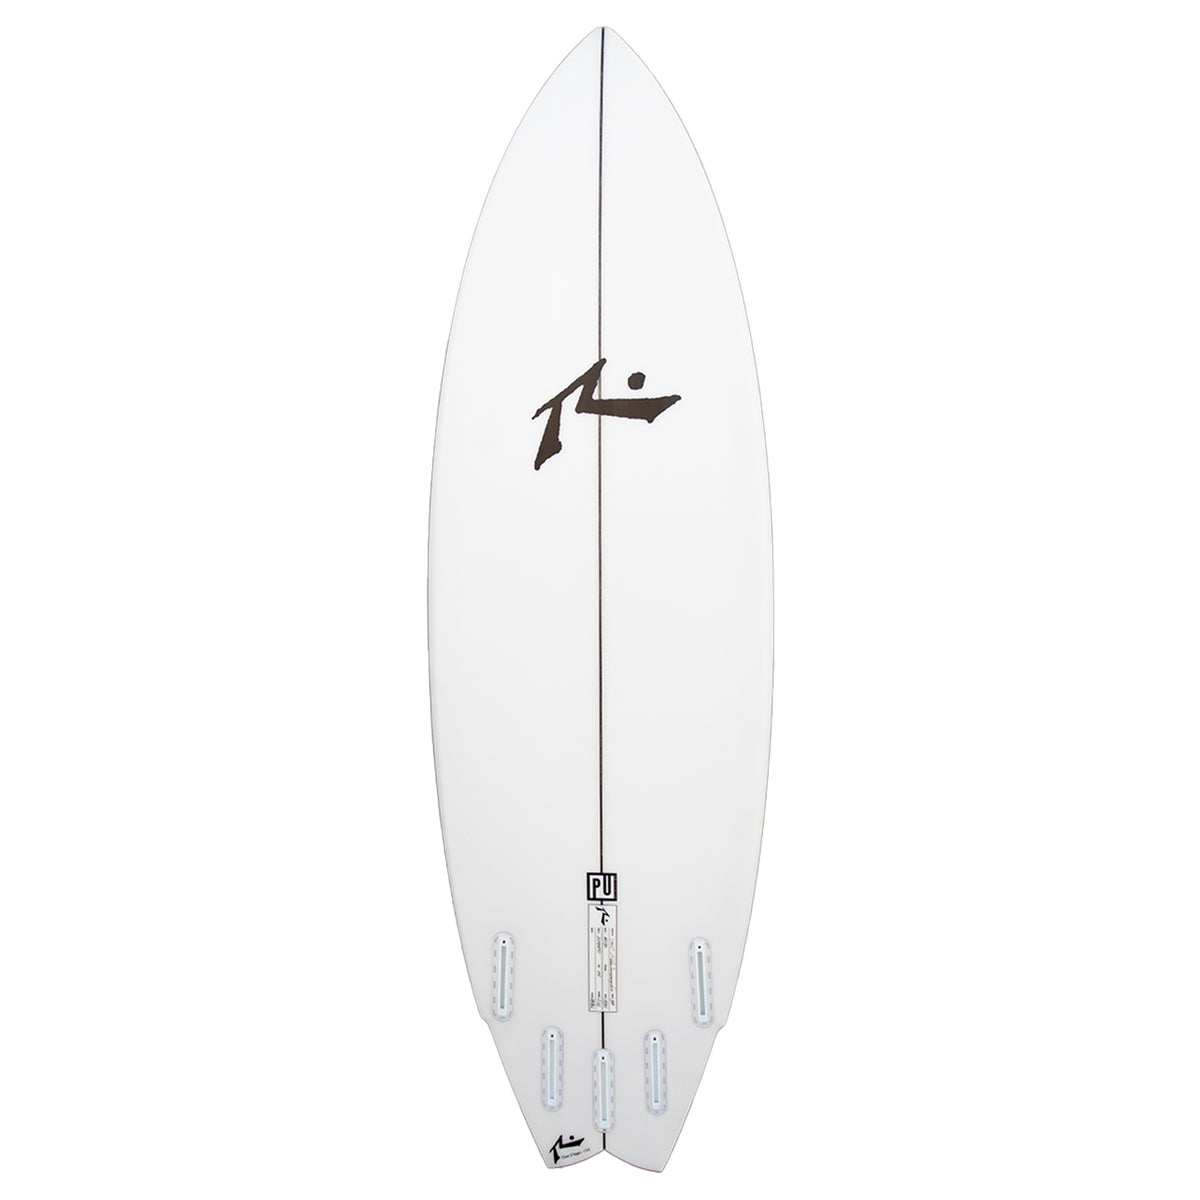 Miso - High Performance Shortboard - Rusty Surfboards - Bottom View